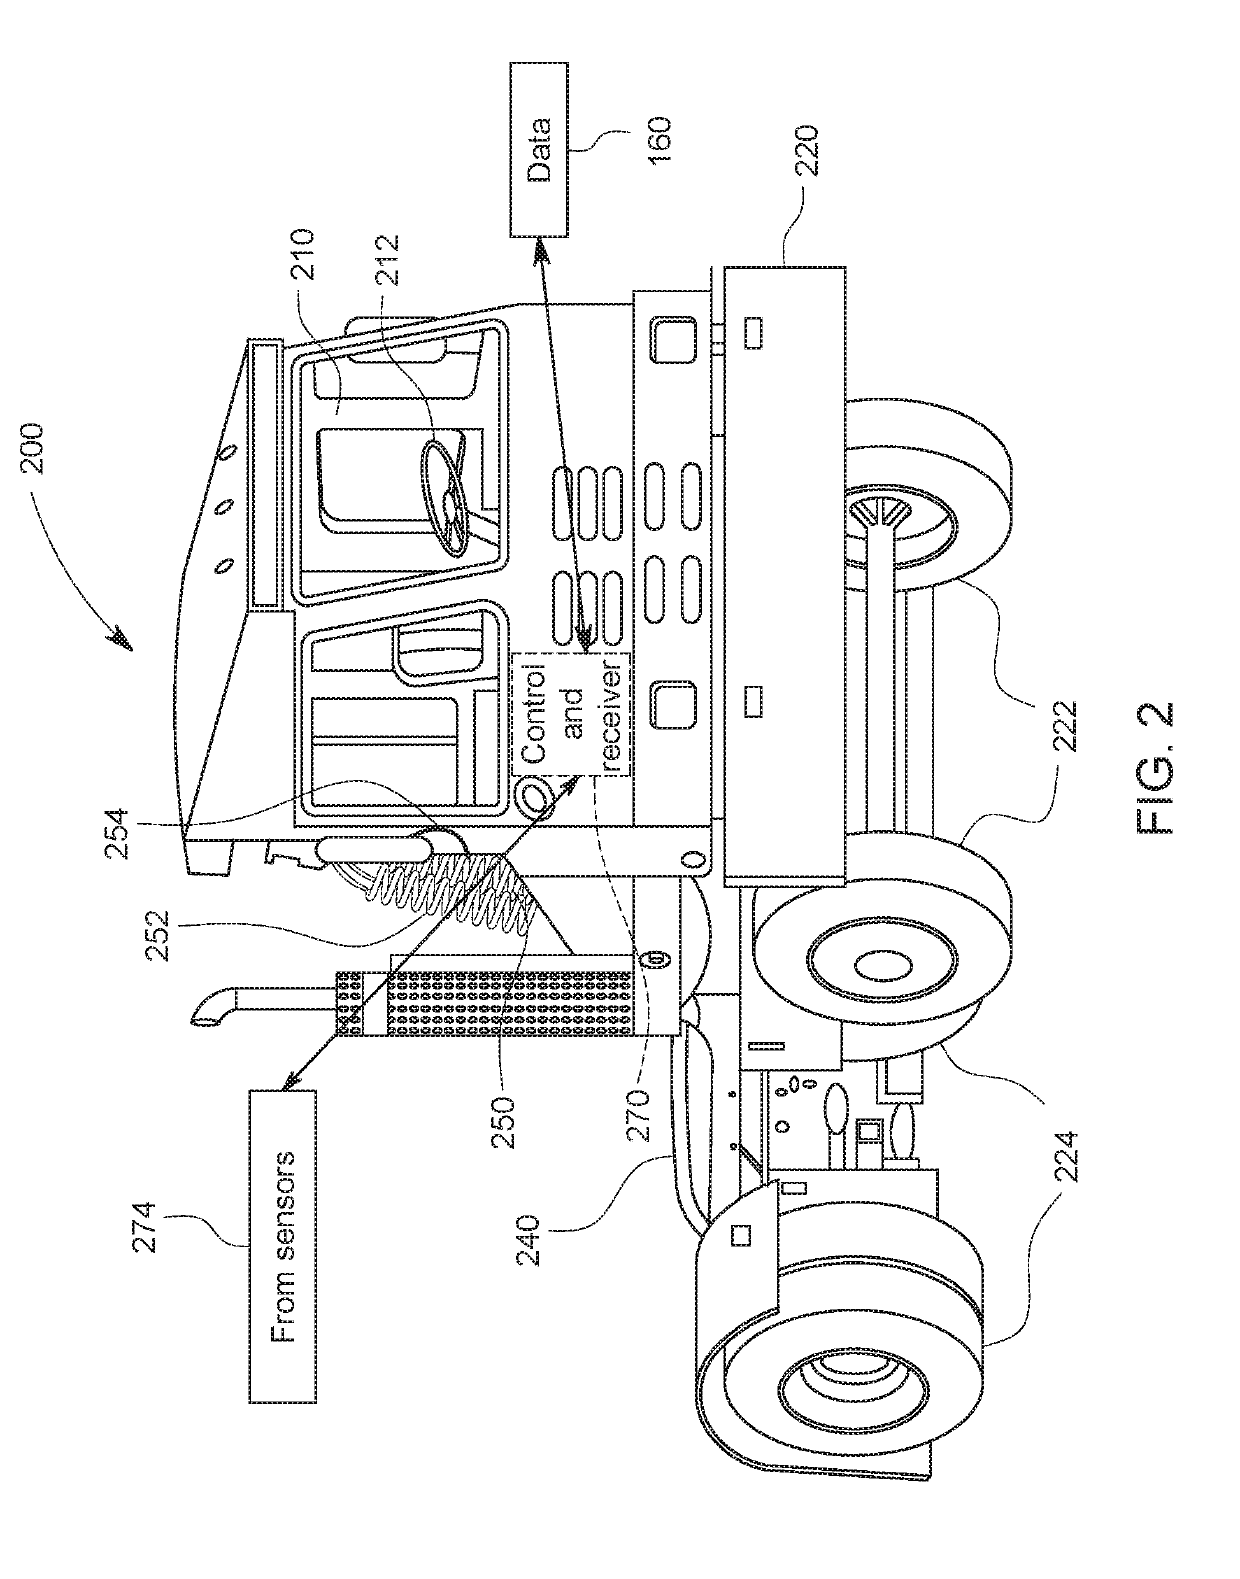 Systems and methods for automated operation and handling of autonomous trucks and trailers hauled thereby